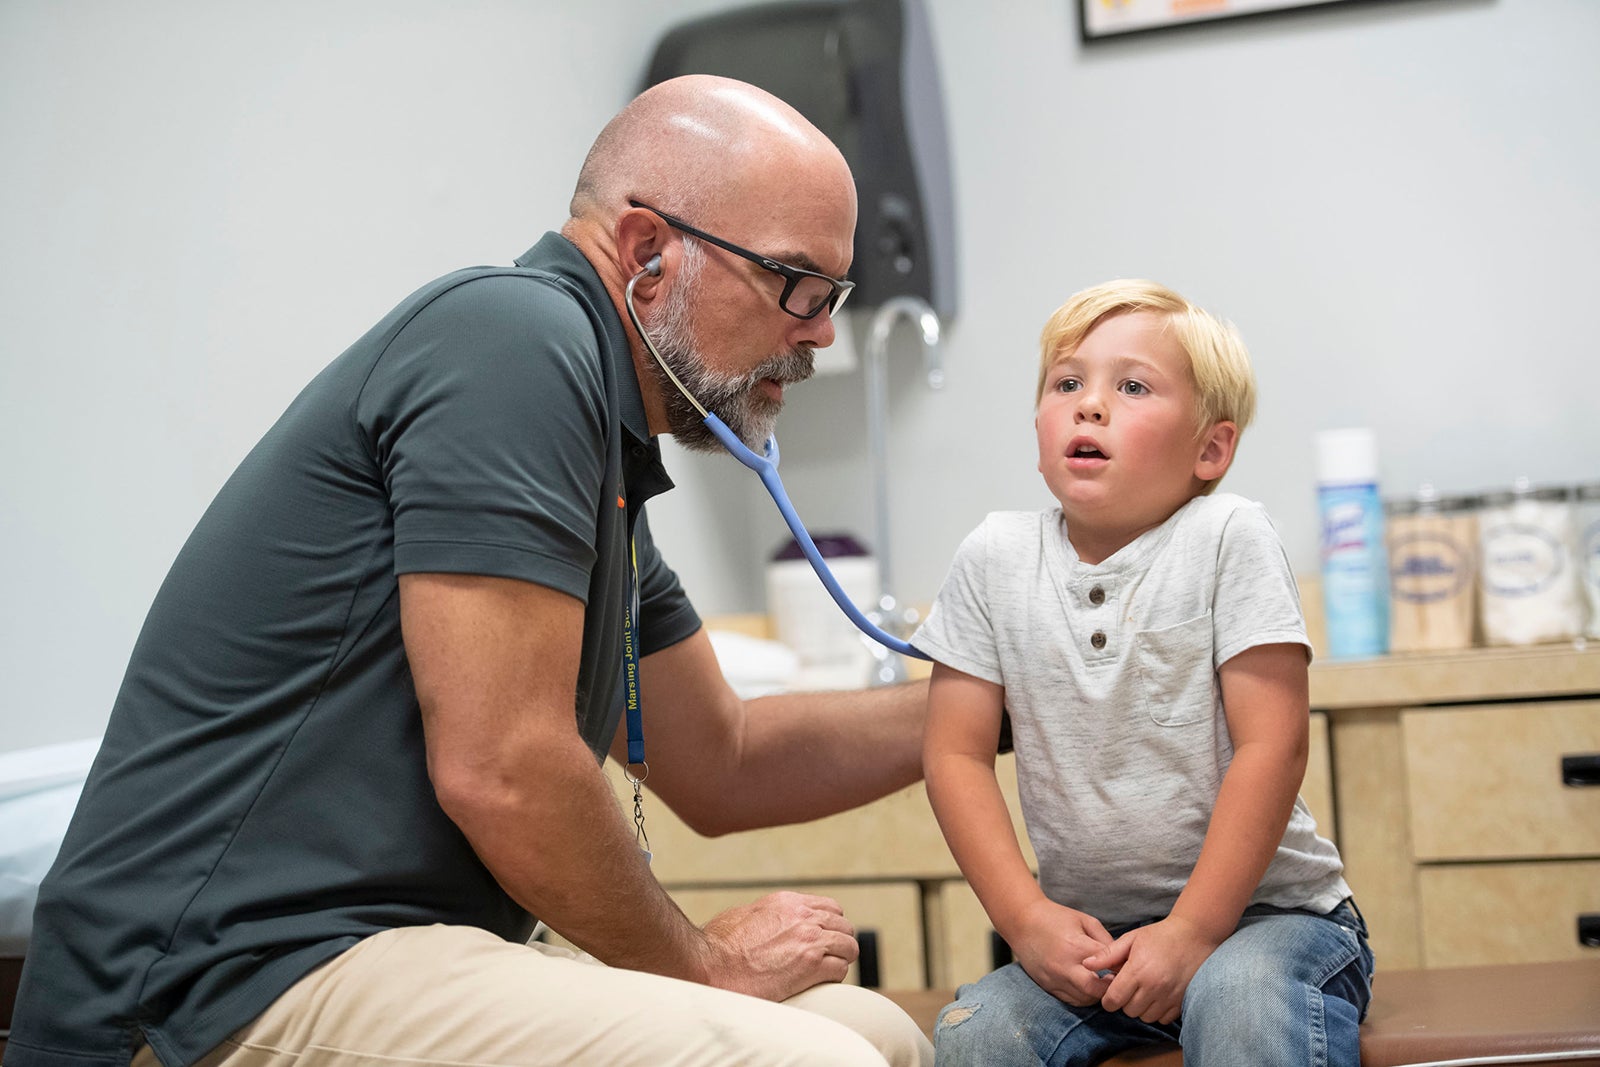 Max listens to a child's lungs using a stethoscope